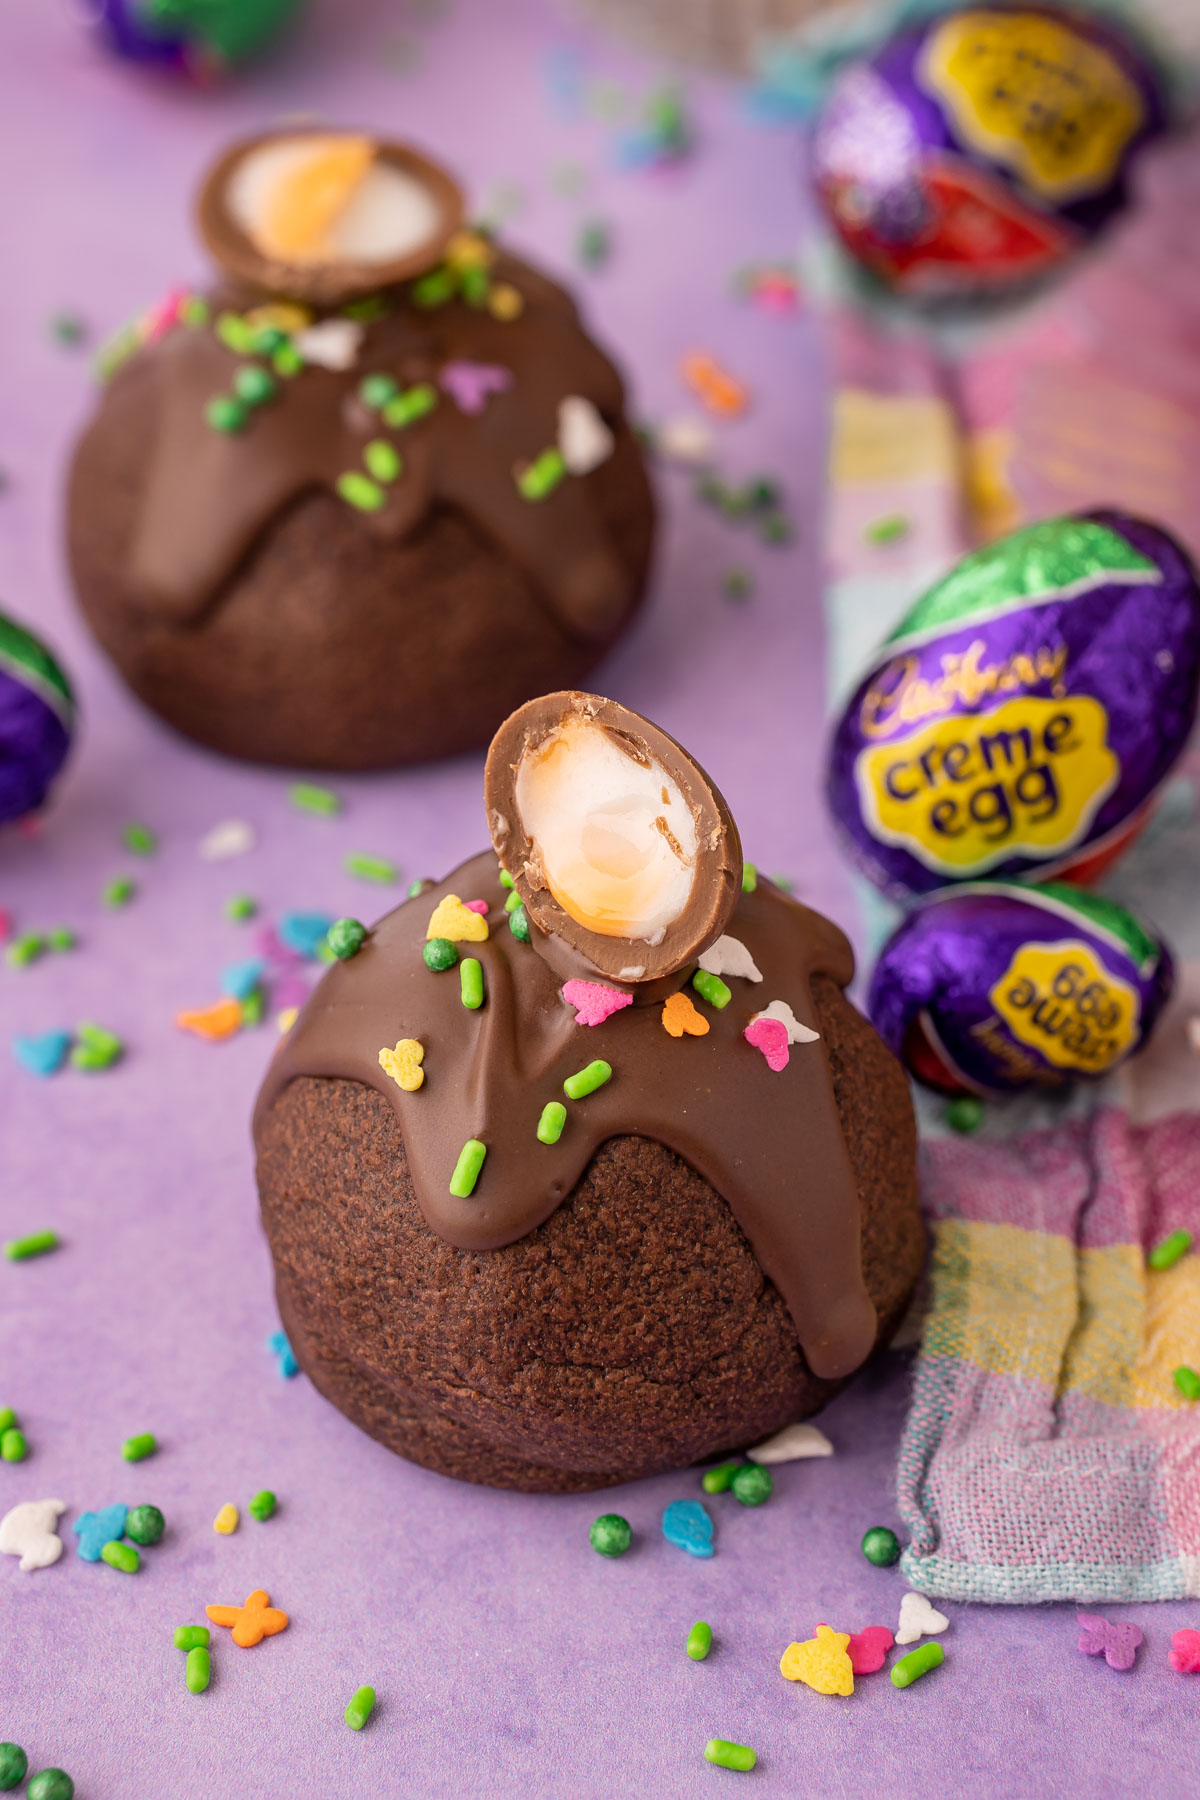 A chocolate cookie topped with mini cadbury creme egg on a purple surface.